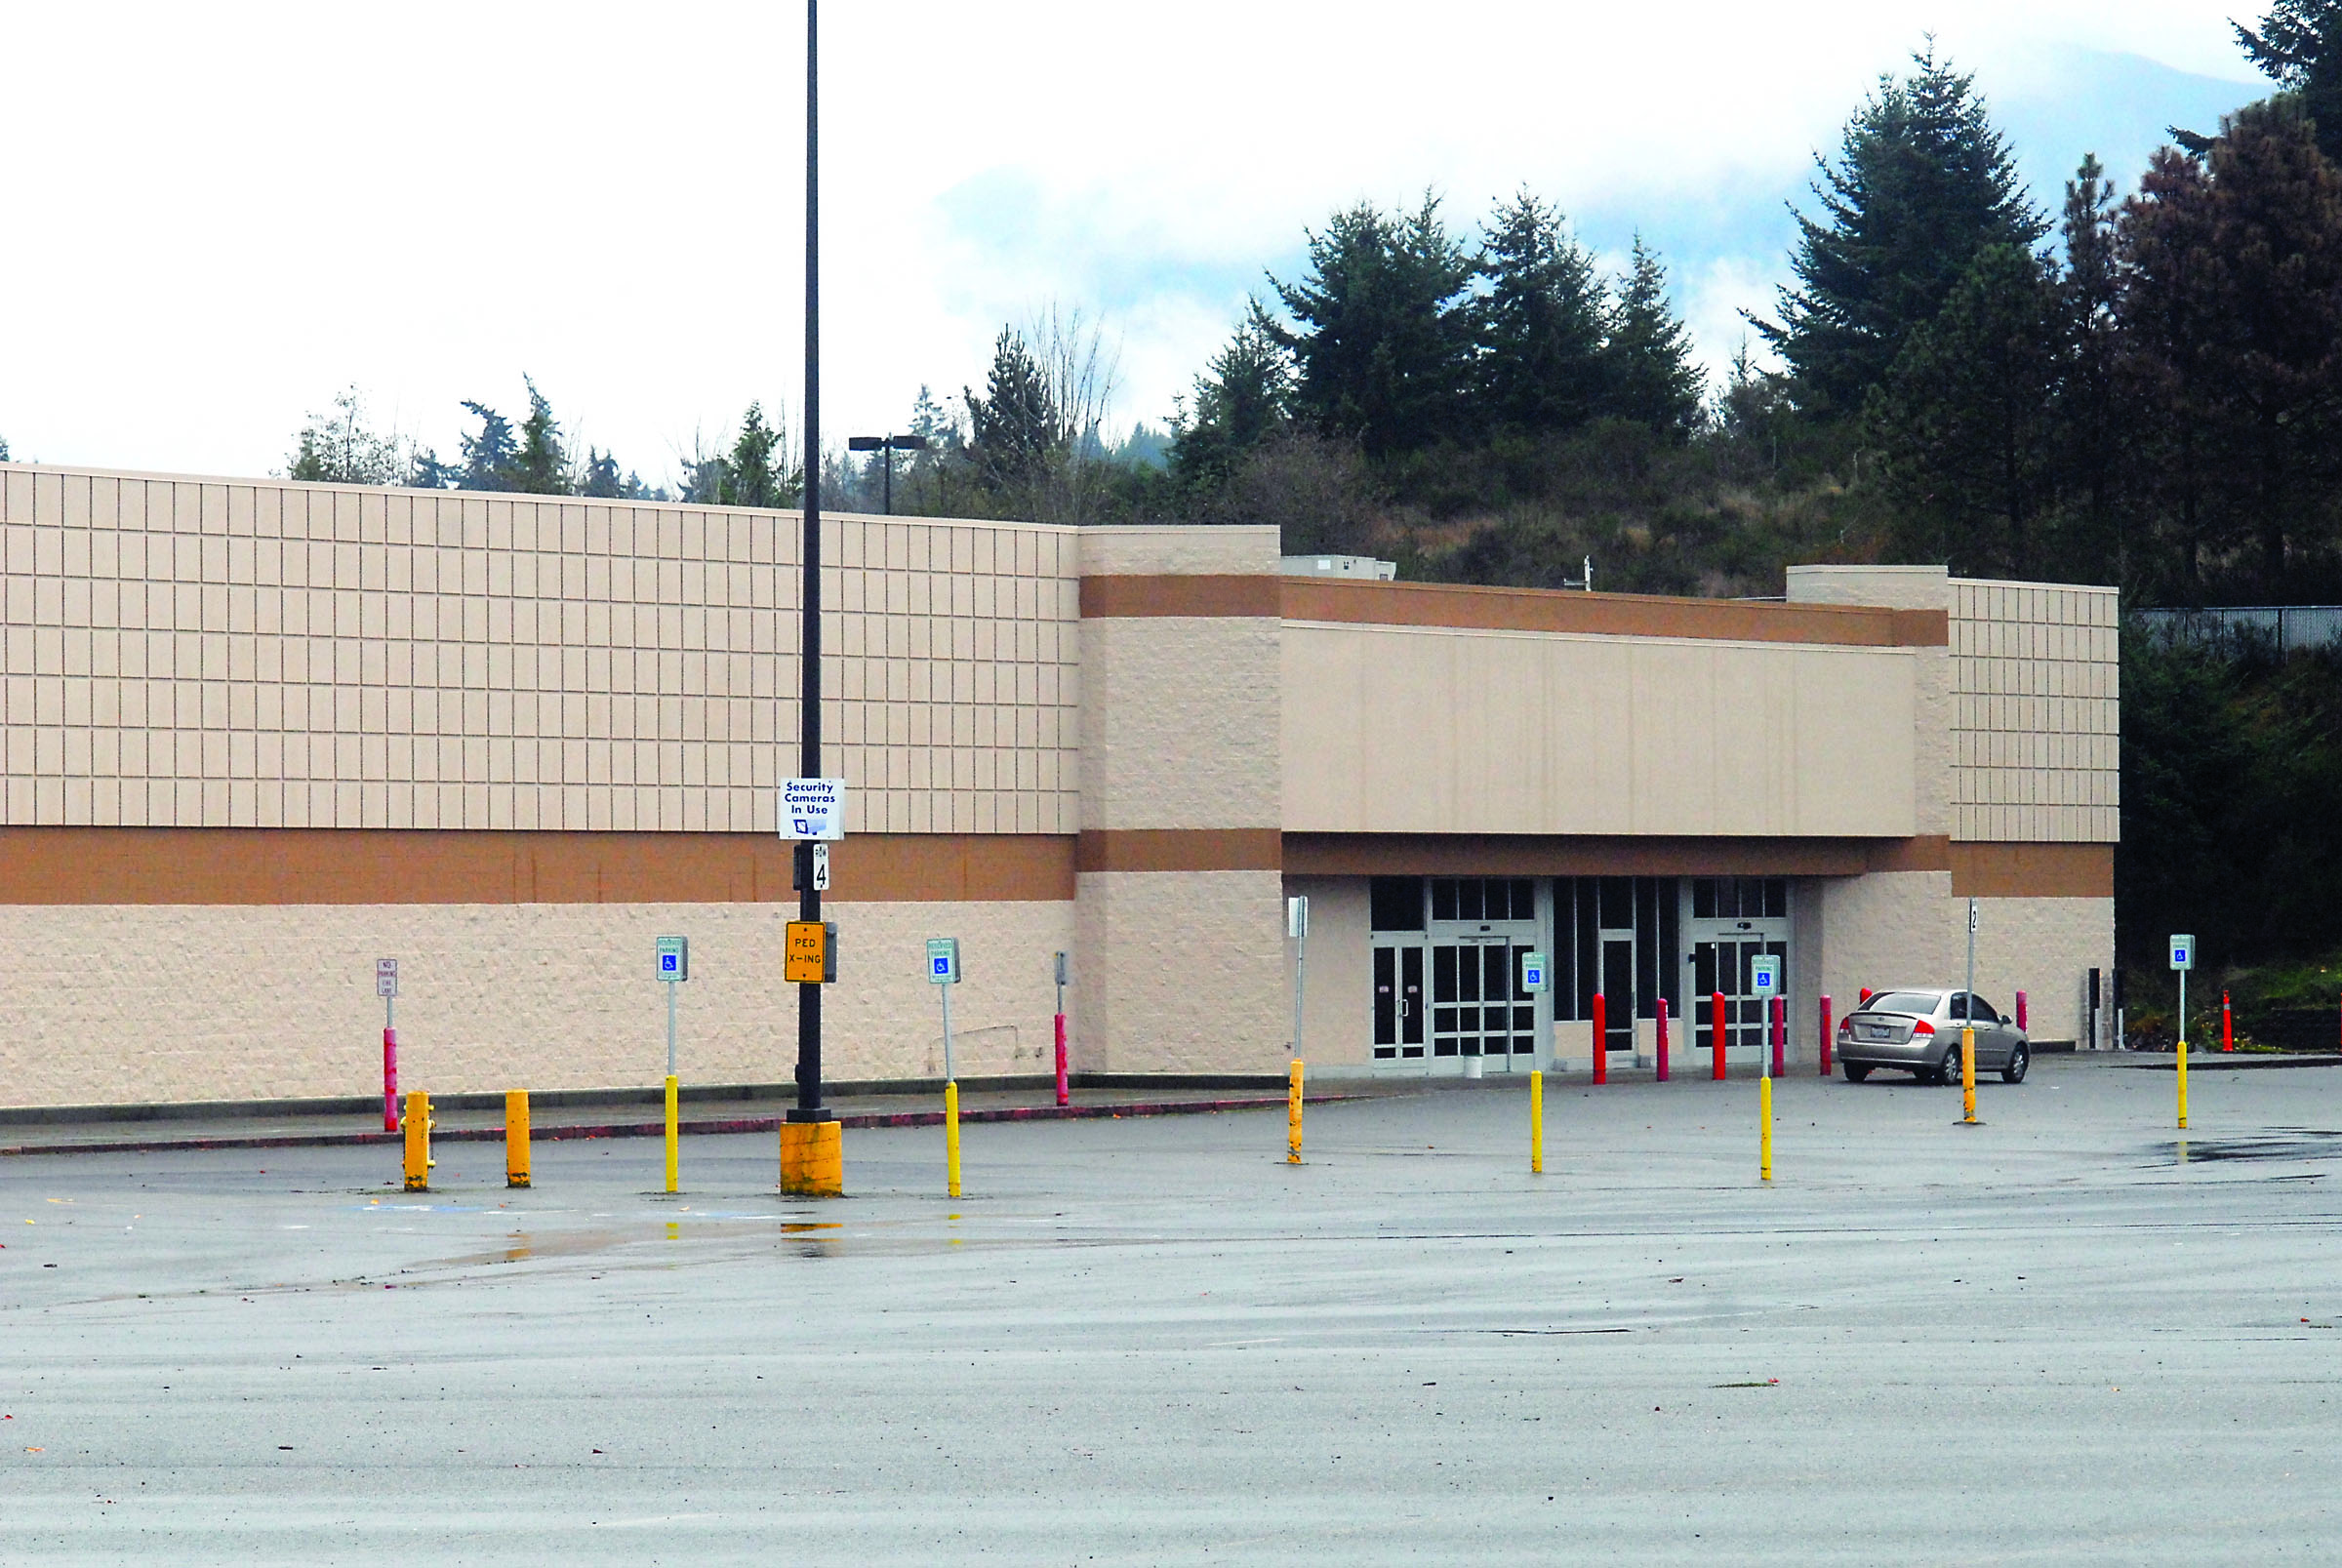 The former Port Angeles Walmart store in east Port Angeles. — Keith Thorpe/Peninsula Daily News